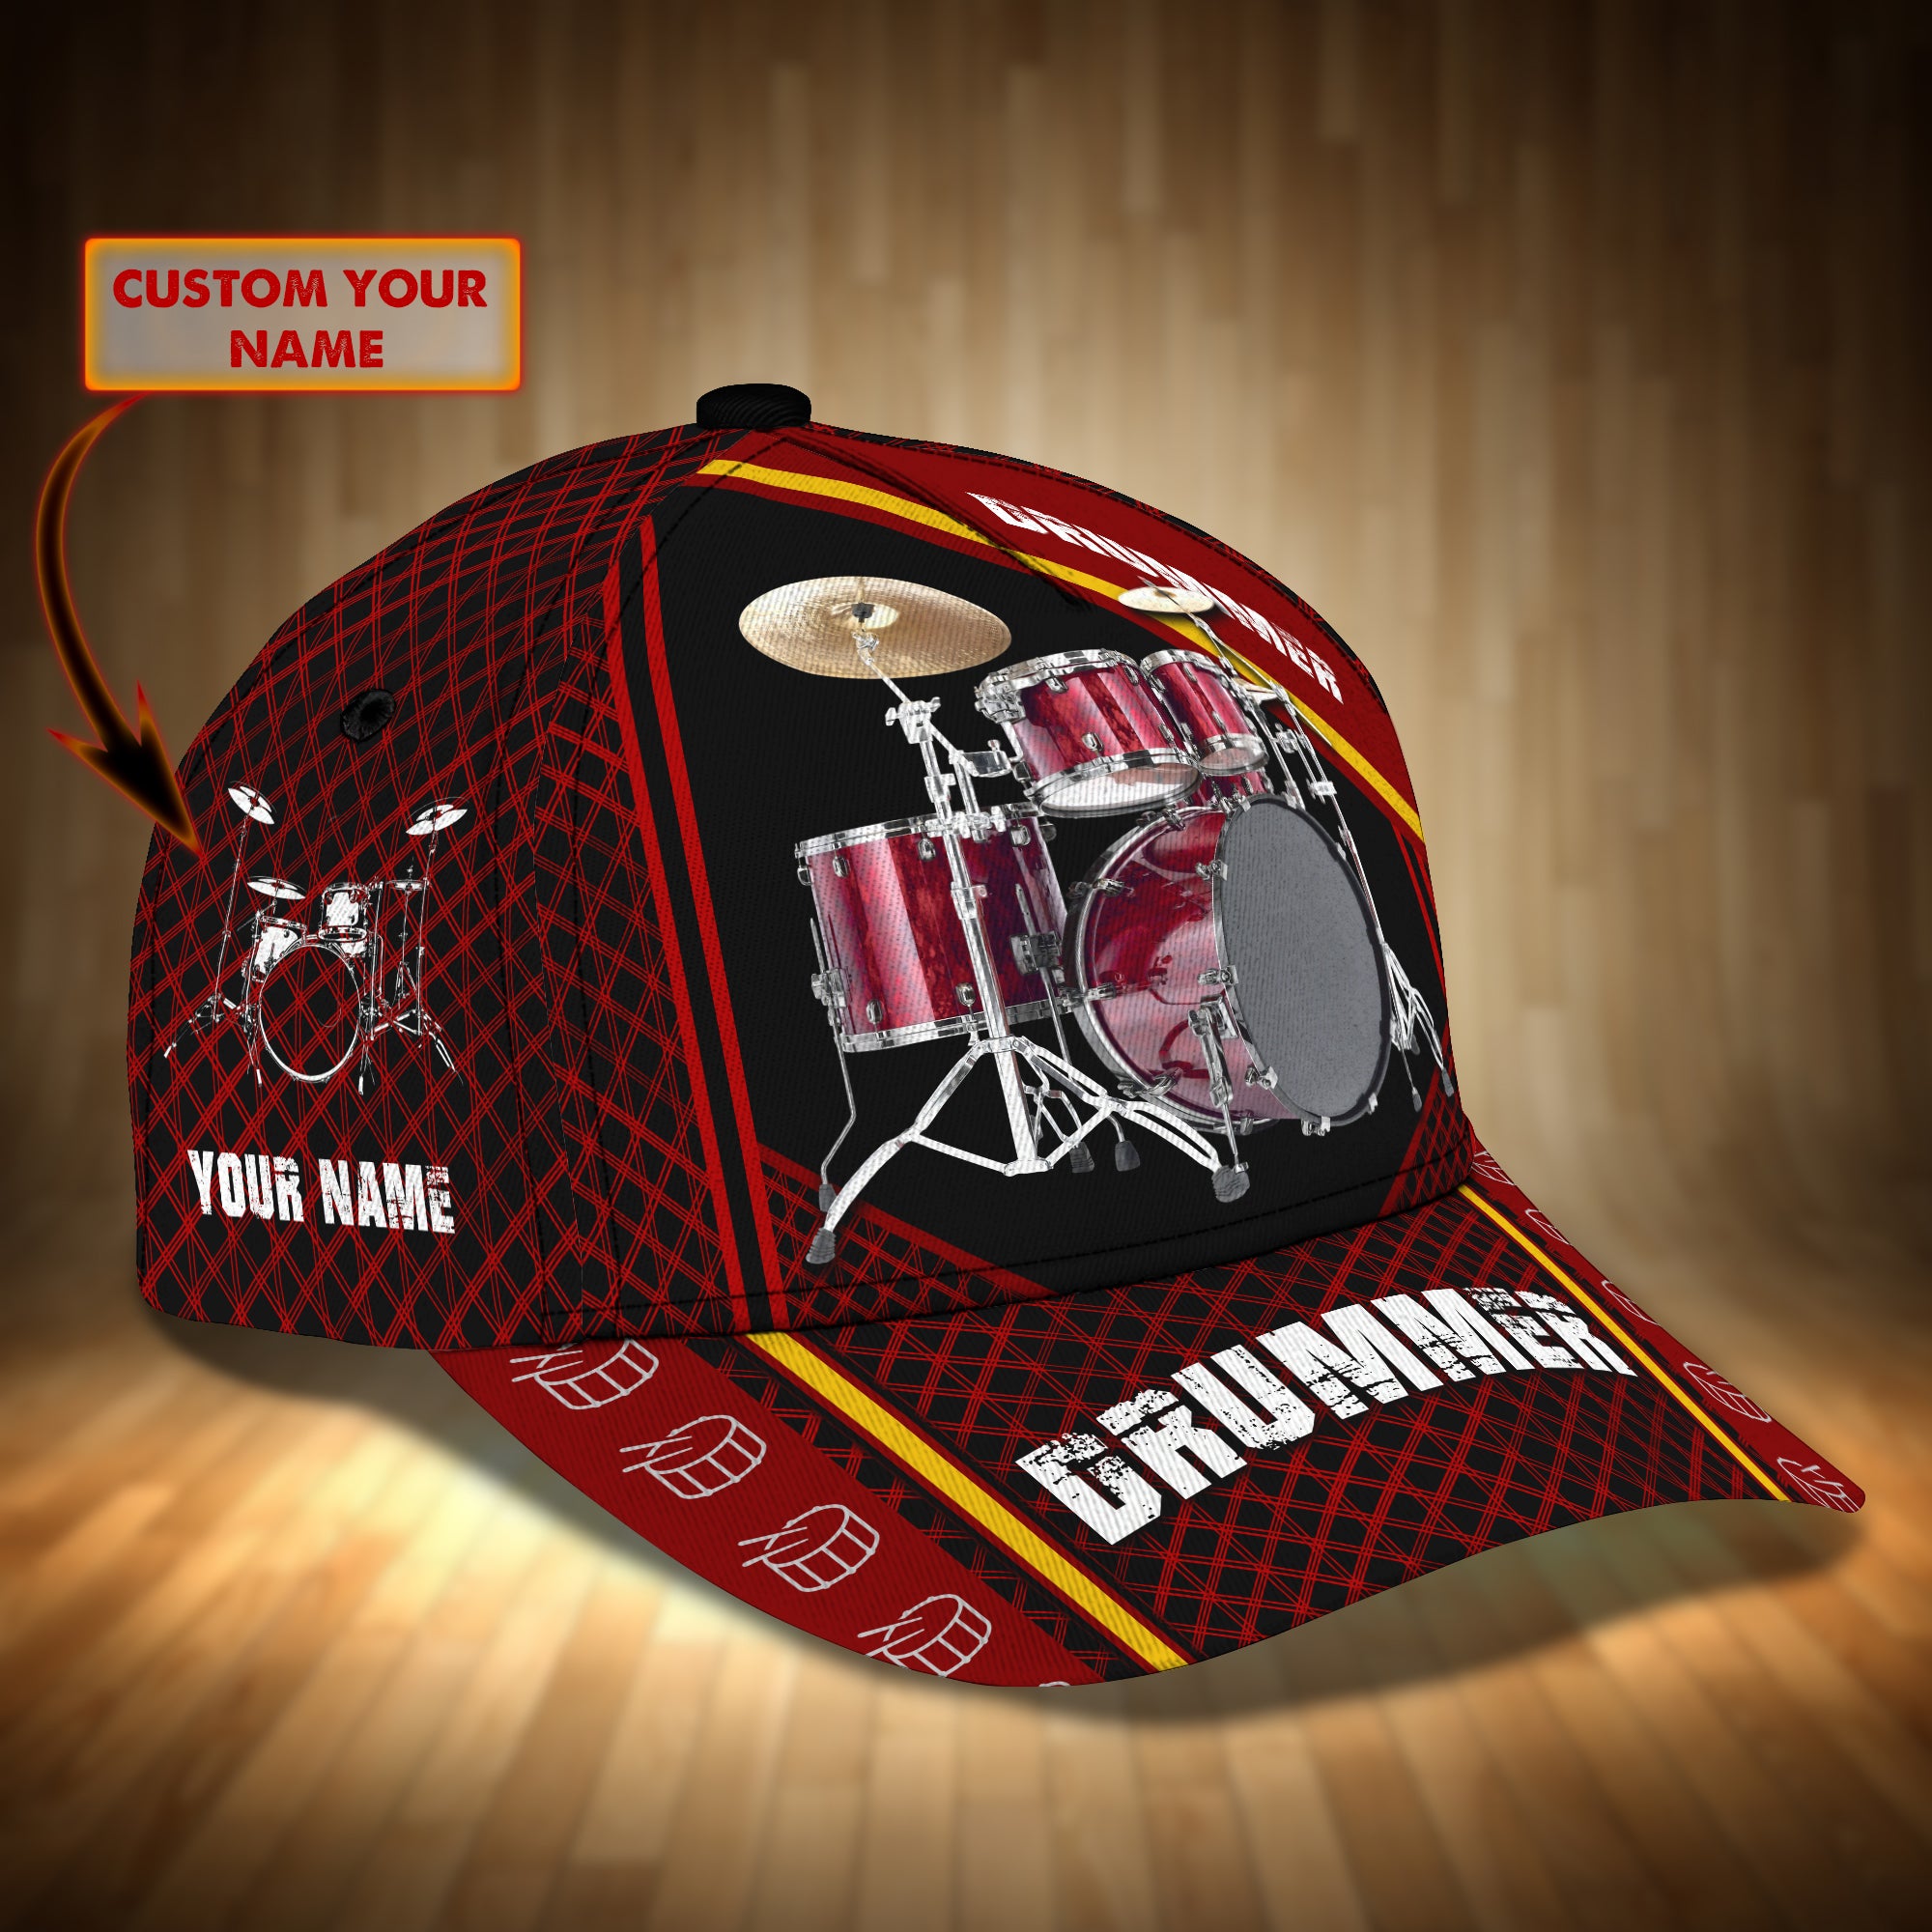 Red Drum Drummer Personalized Name Cap 14 RinC